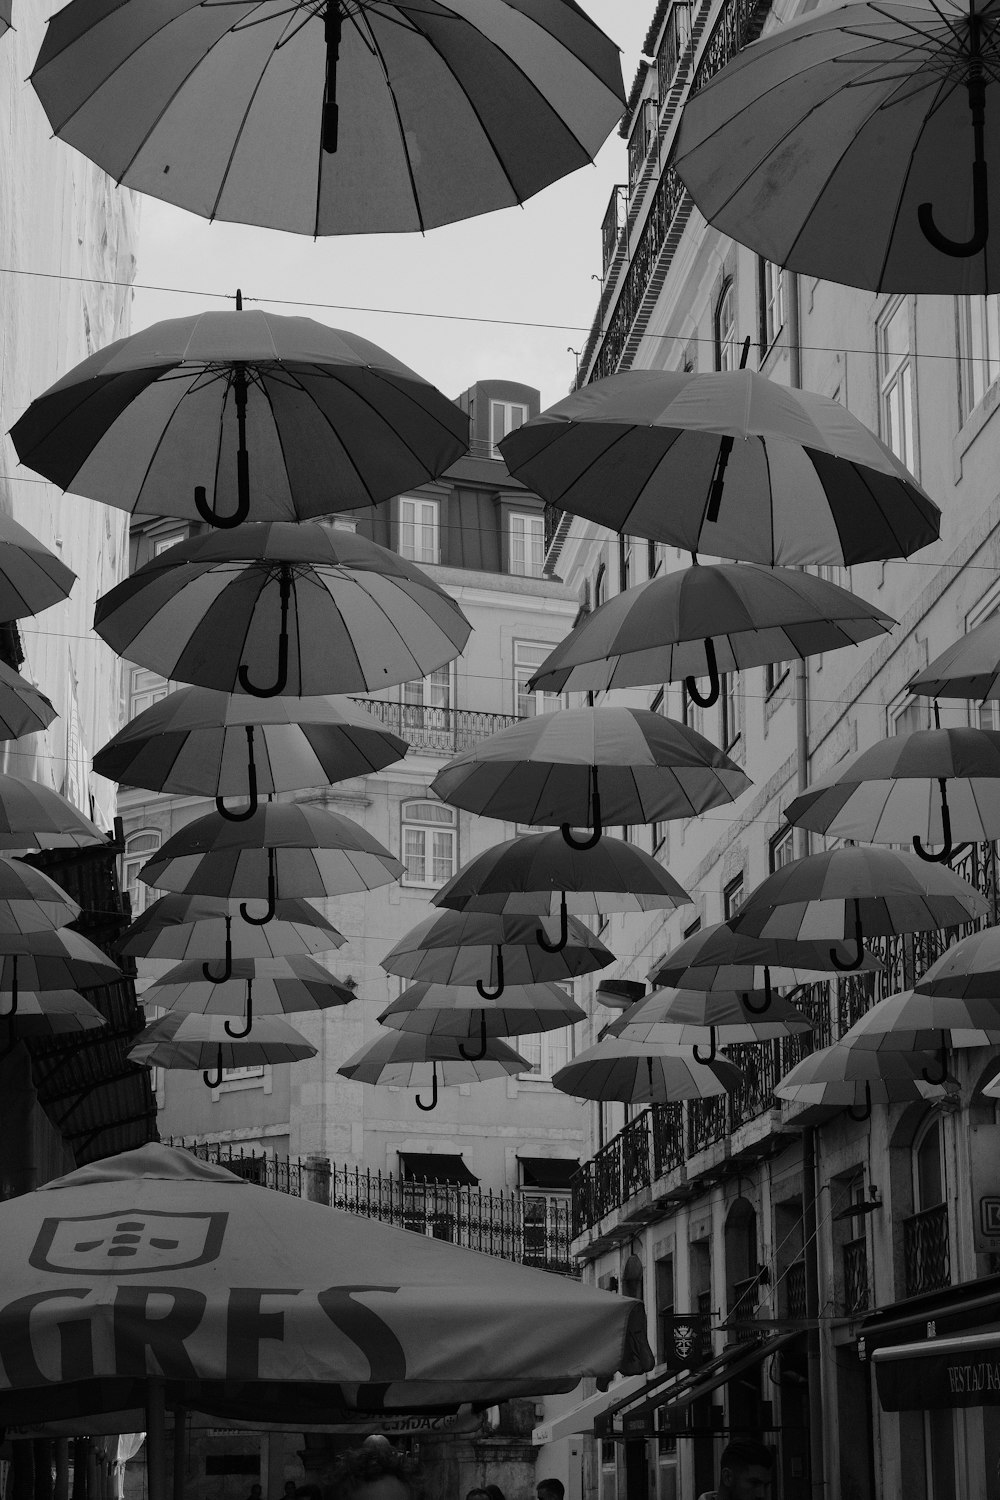 several umbrellas from a ceiling